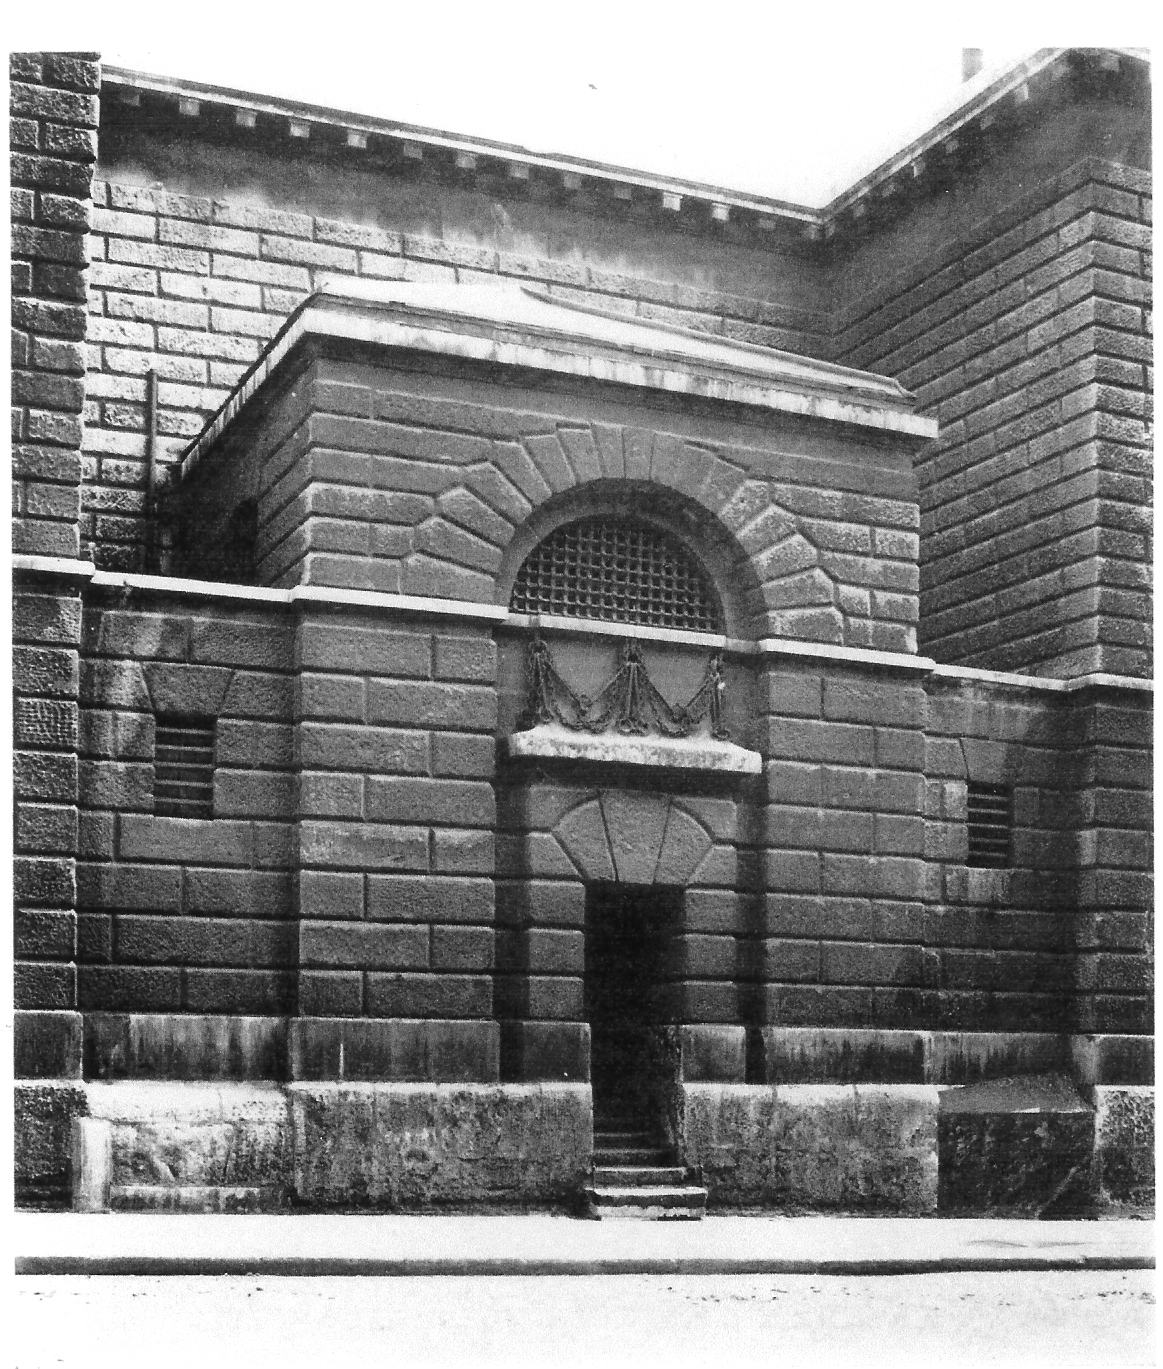 A black, stone built prison, with a narrow door below a high arch